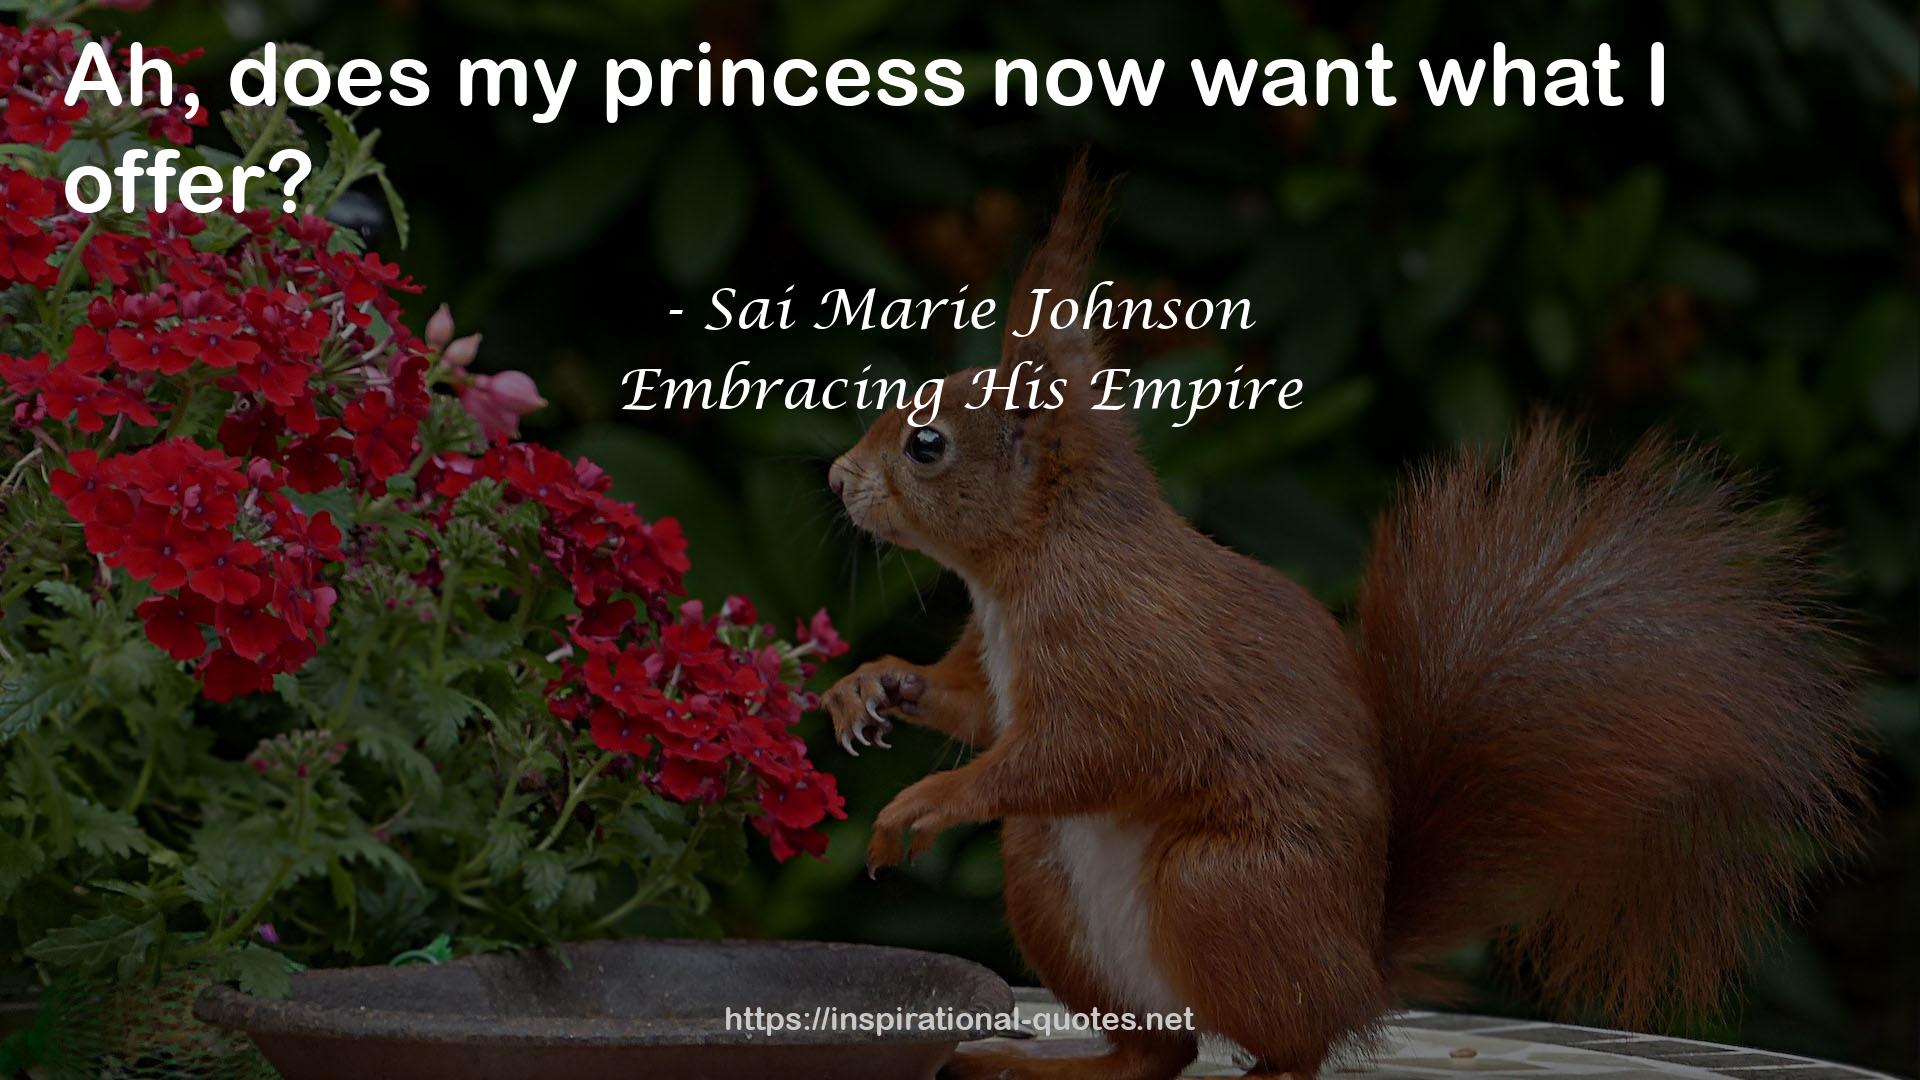 Embracing His Empire QUOTES